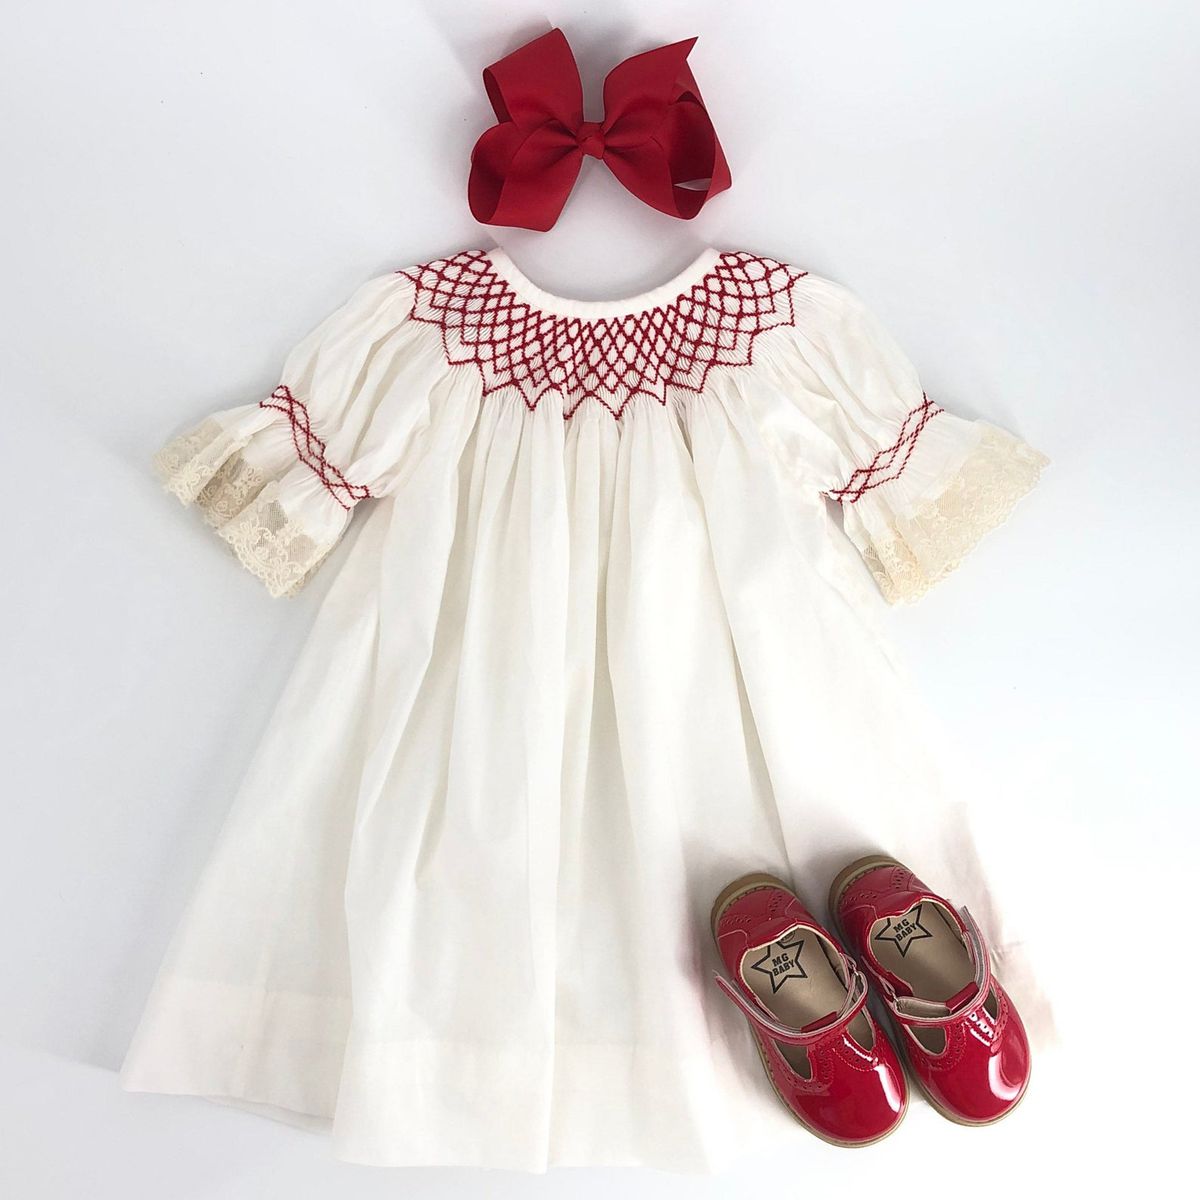 Smocked Holiday Dress Red Gingham With Wreaths 12 months to 6 yrs OR Romper